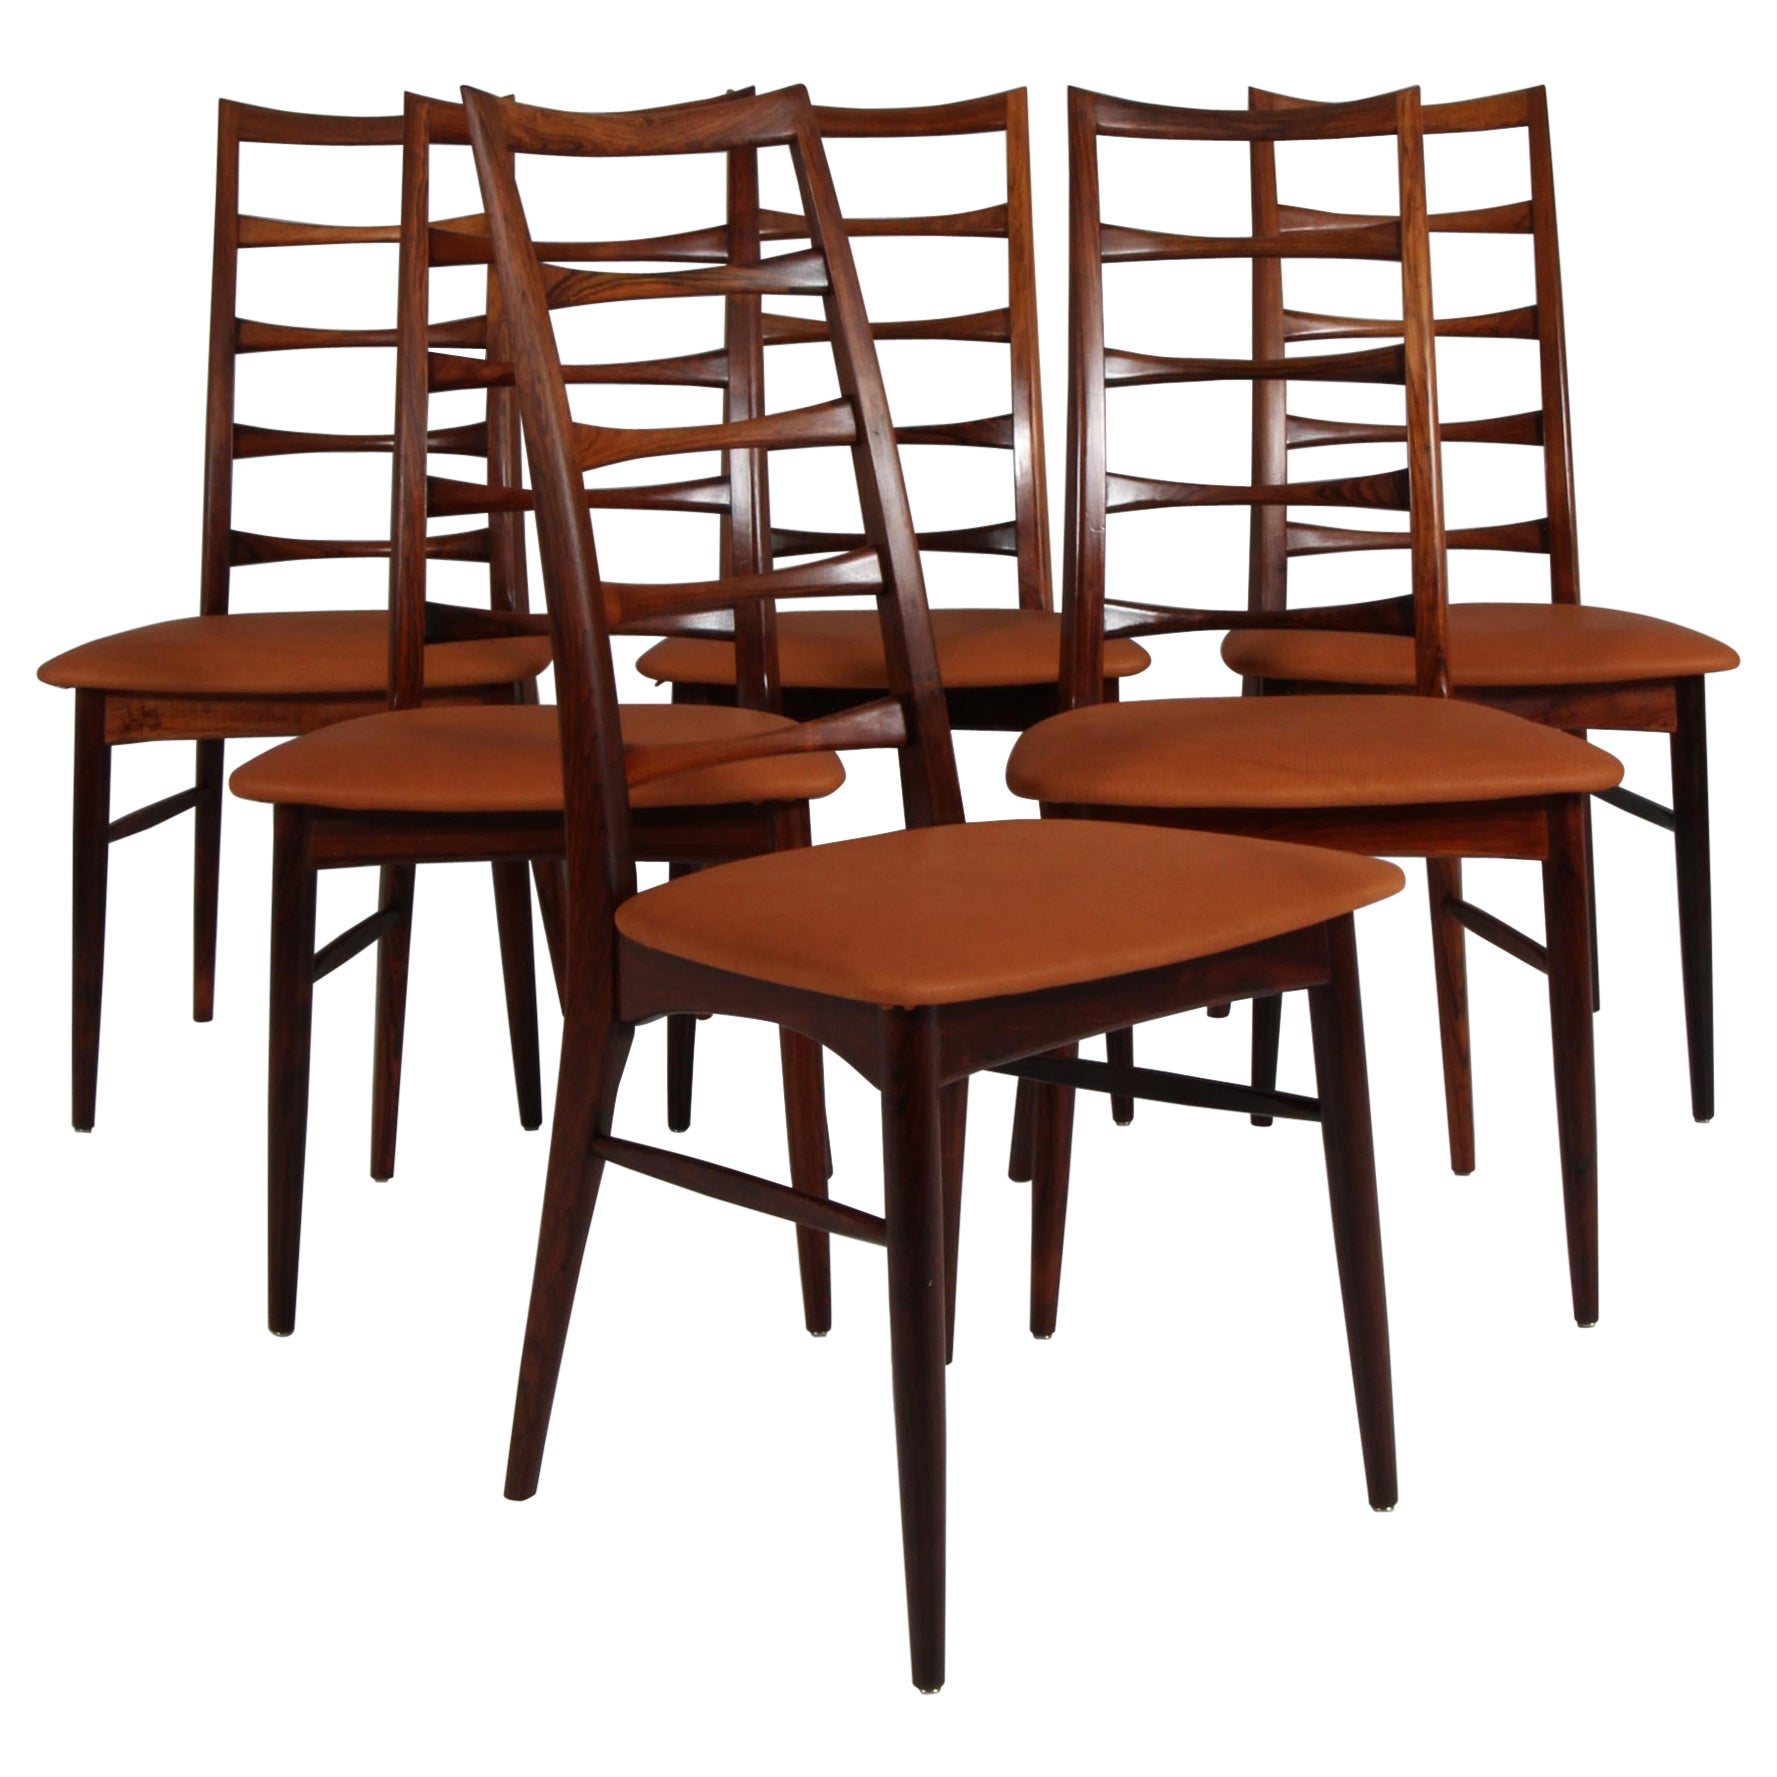 Set of Niels Koefoed Dining Chairs, Model "Lis", 1960s For Sale